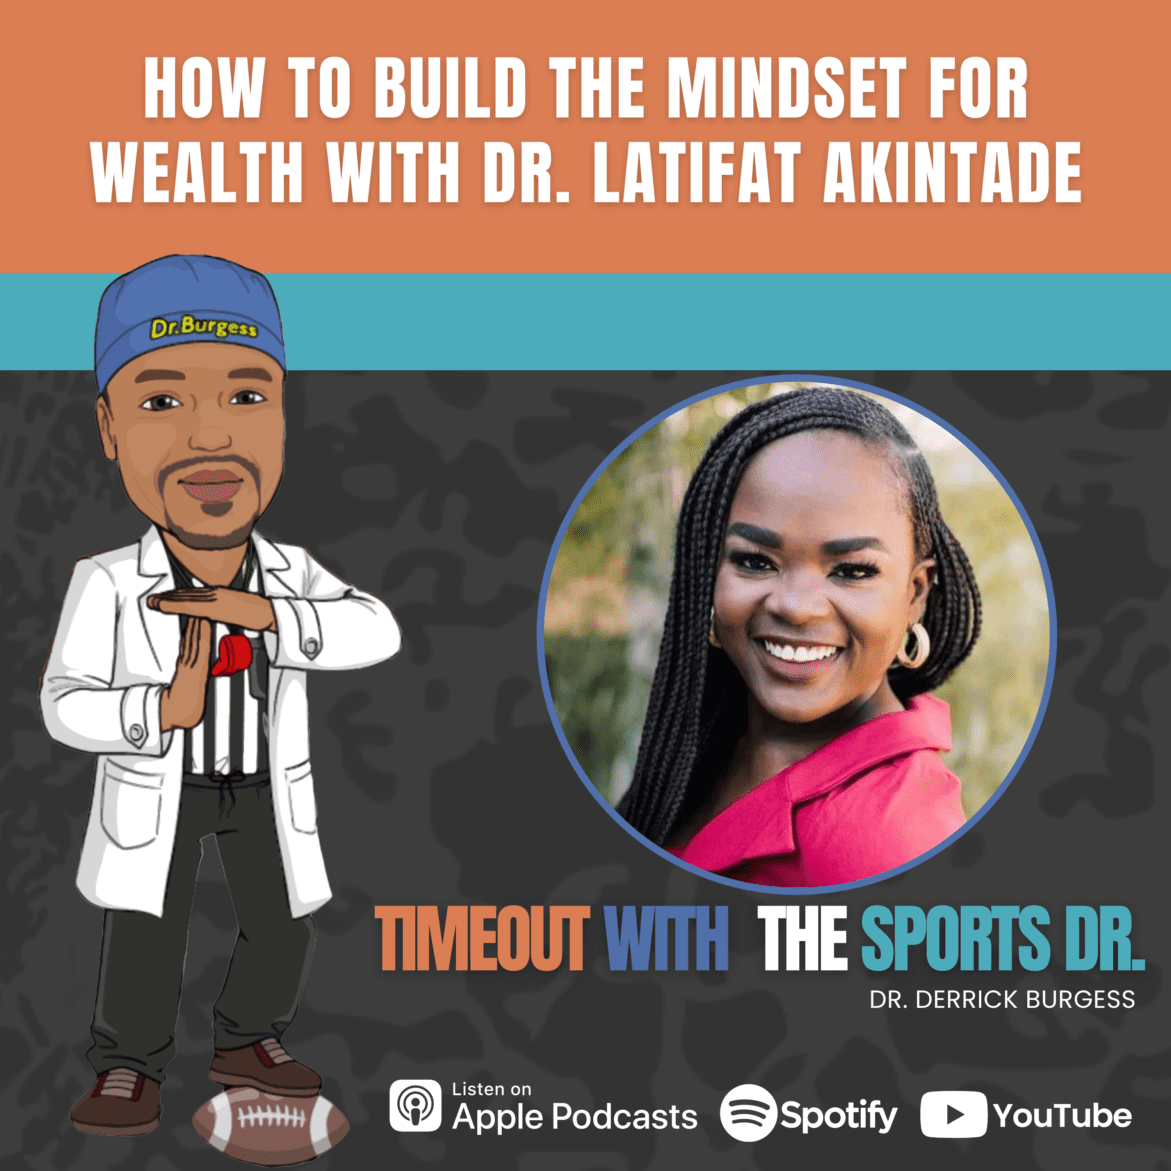 Black Podcasting - How to Build the Mindset for Wealth with Dr. Latifat Akintade